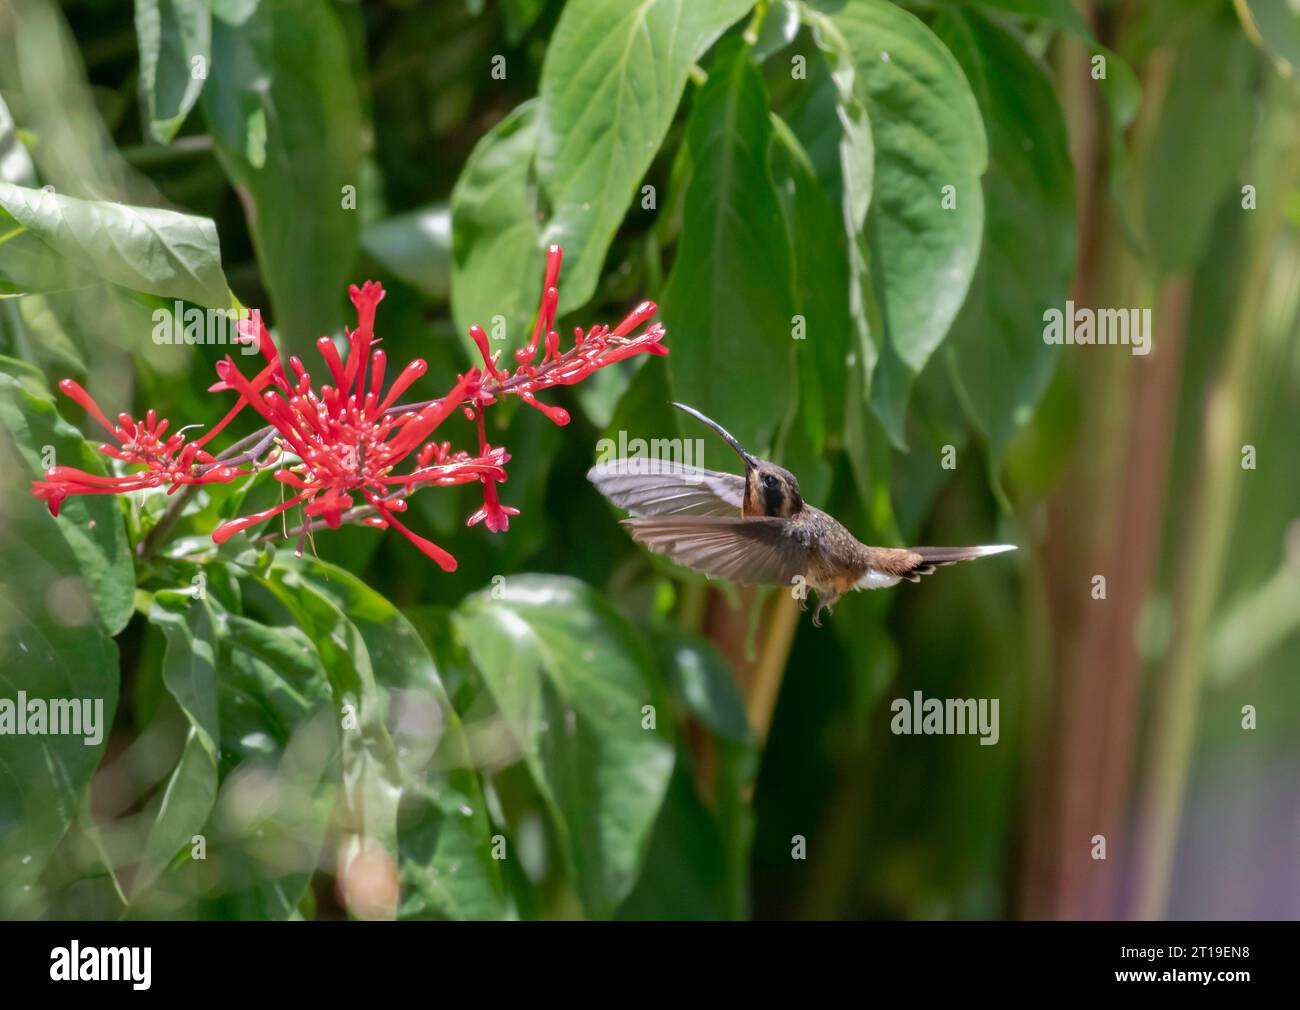 Little Hermit hummingbird, Phaethornis longuemareus, flying in a garden with flowers in beautiful pose Stock Photo